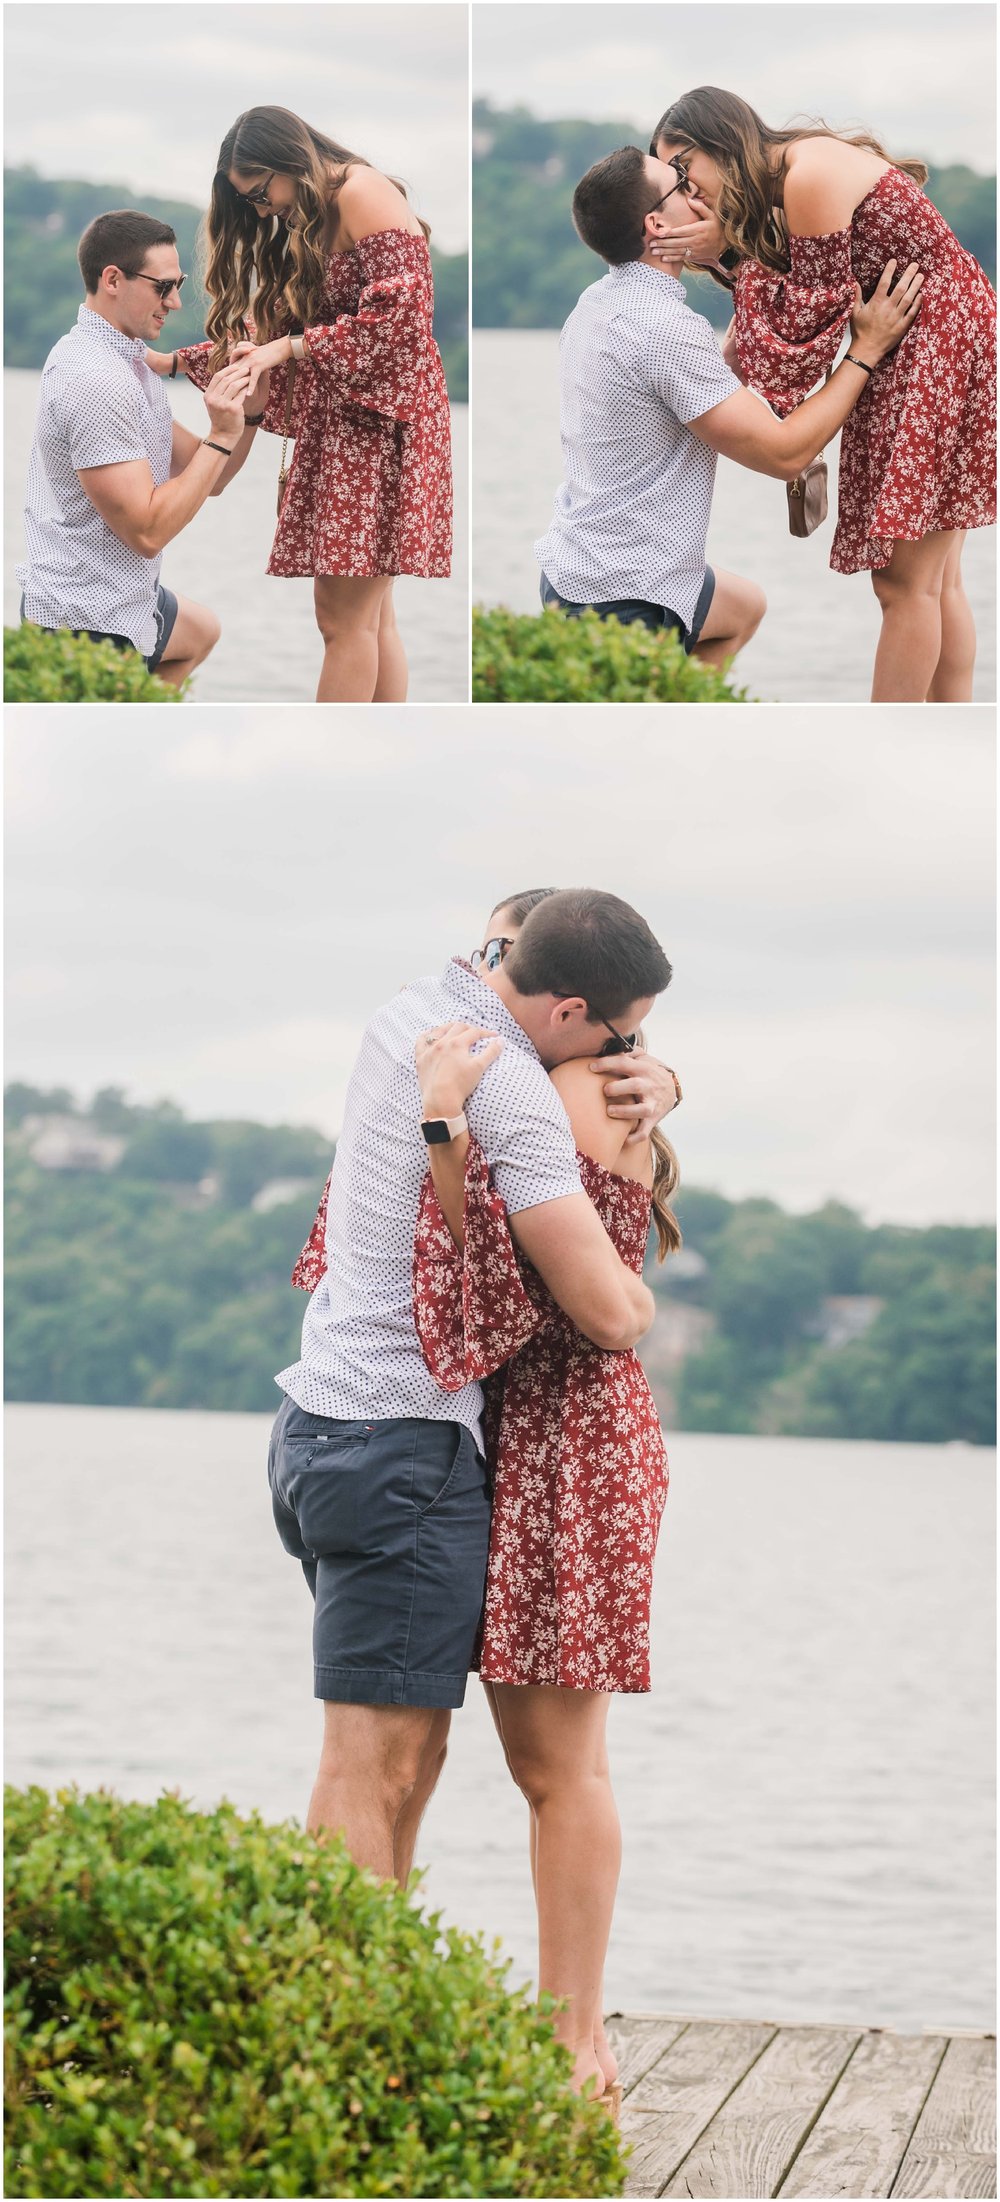 secret proposal, northern new jersey, newly engaged couple smiling and laughing, having fun on the boardwalk near the lake